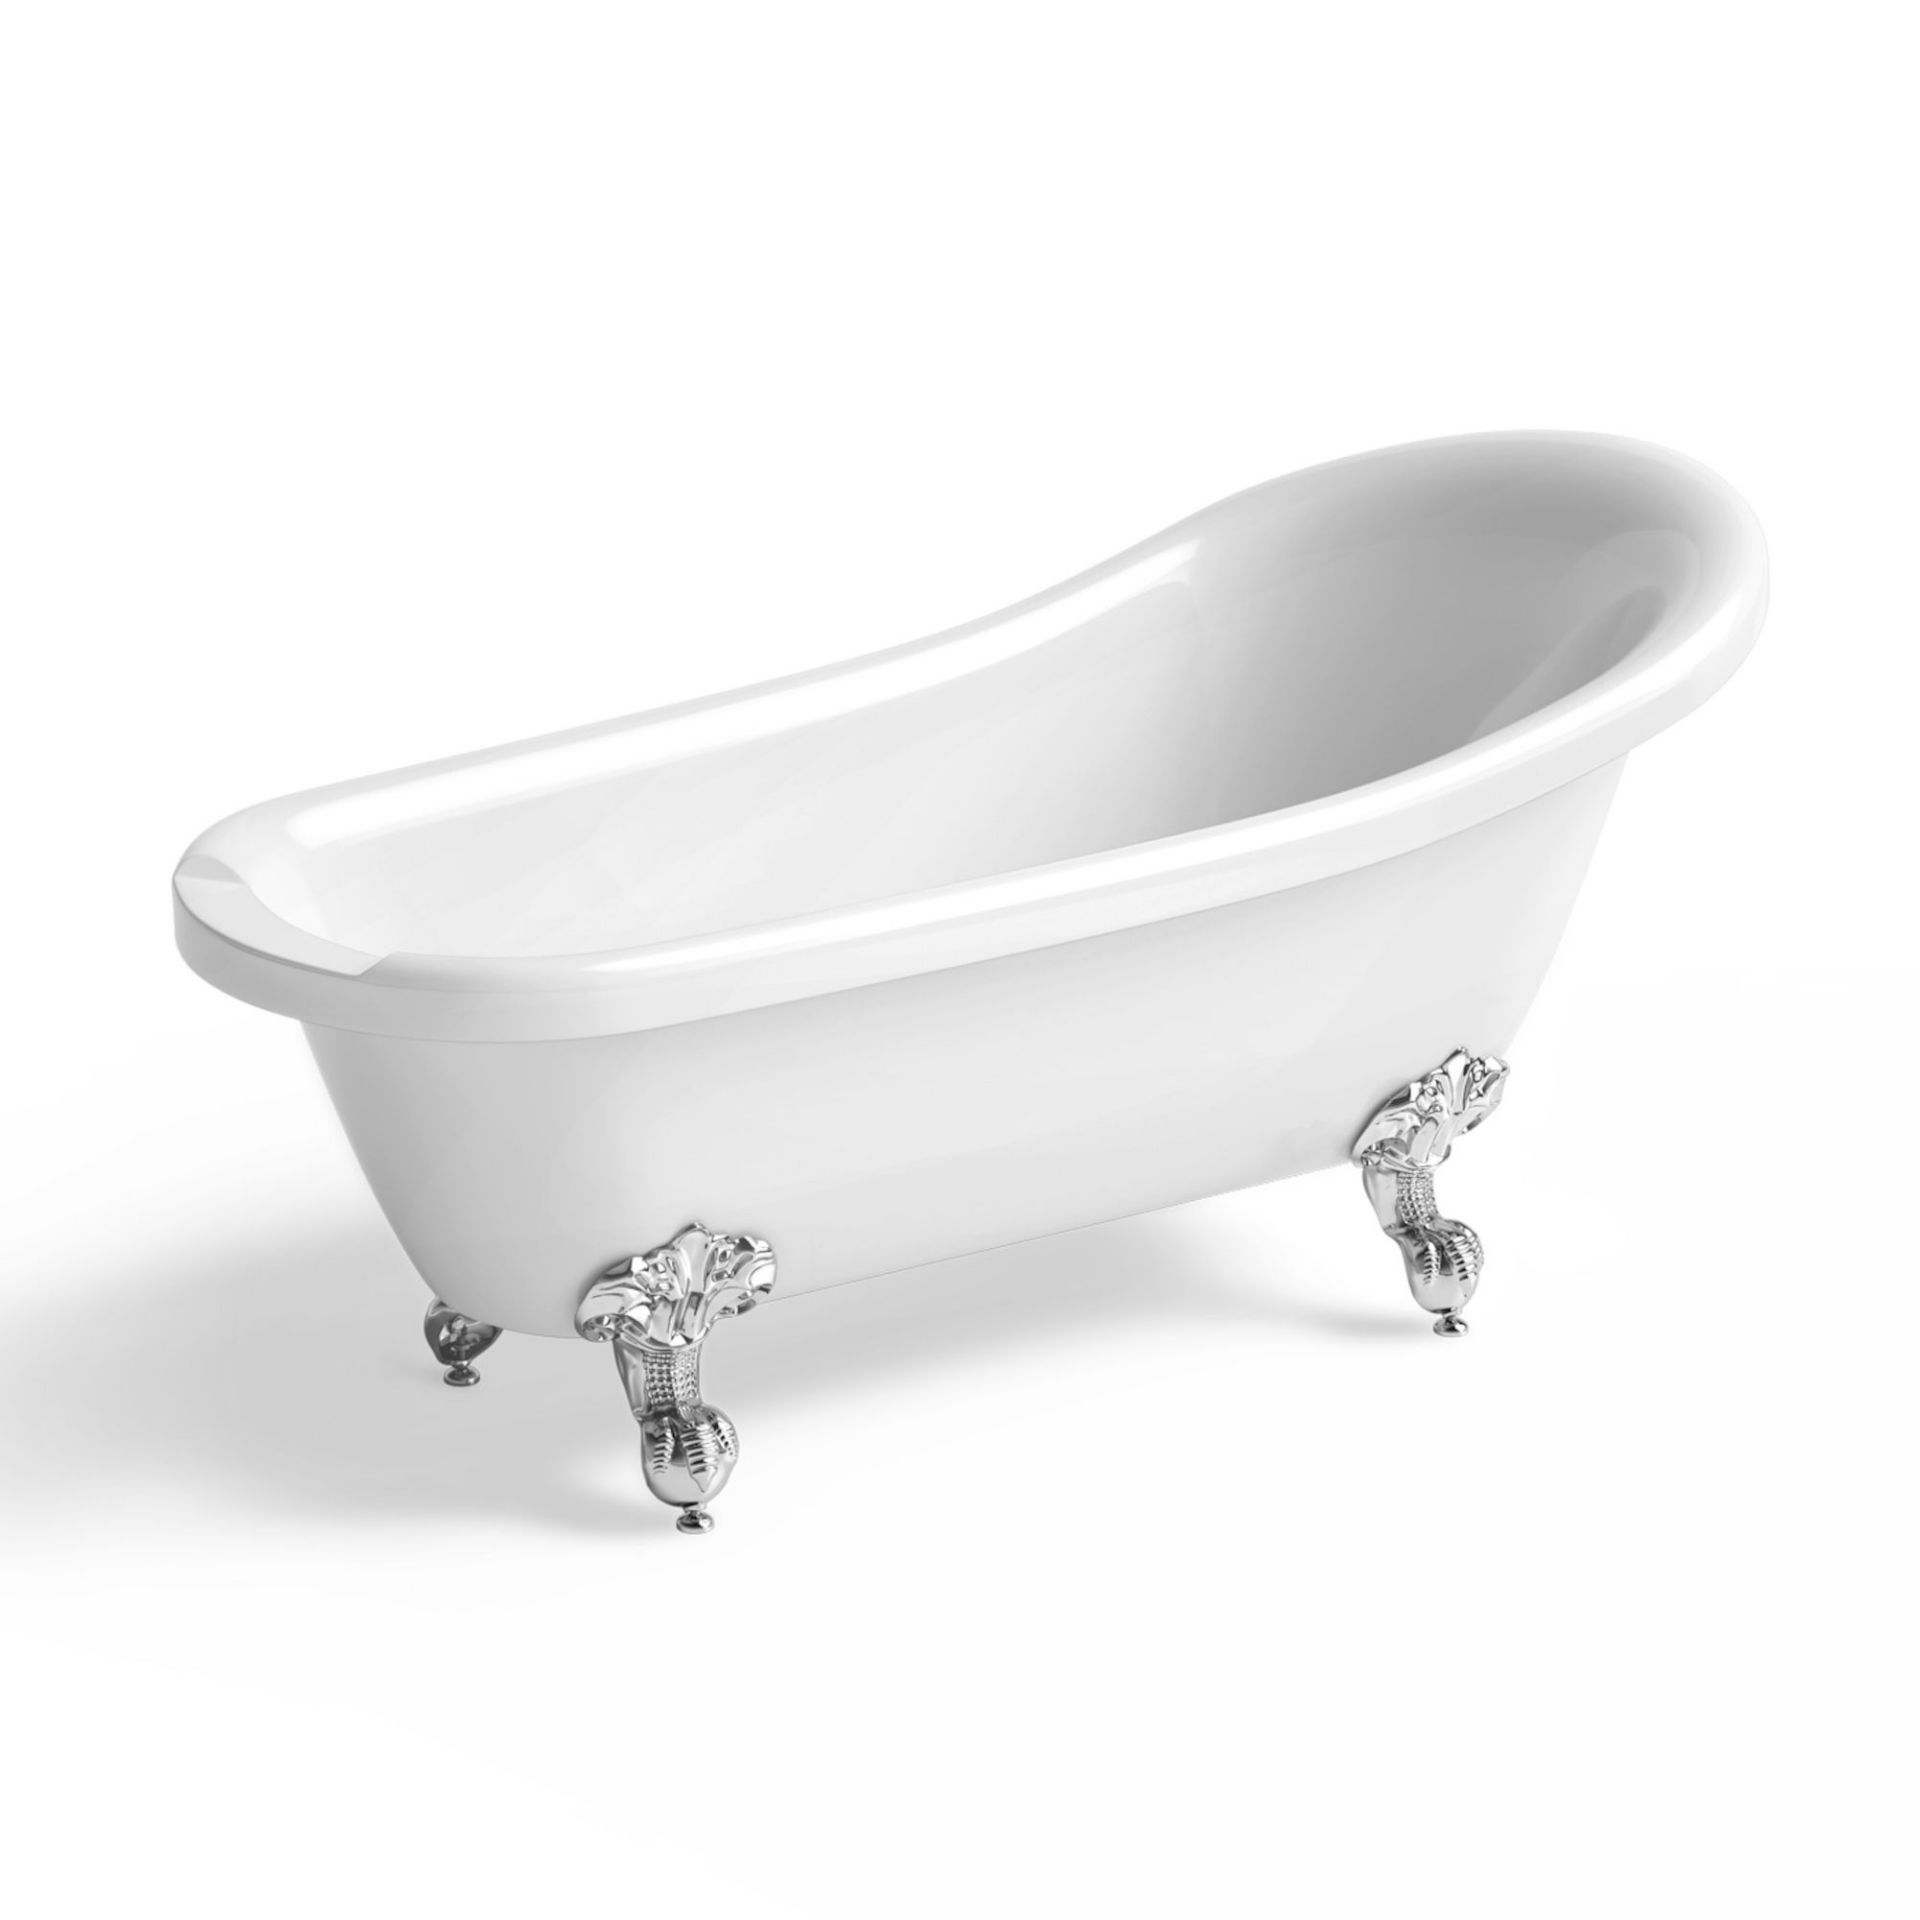 (SUP159) New 1750x700mm Cambridge Traditional Roll Top Slipper Bath - Chrome Feet. RRP £999.99. - Image 2 of 2